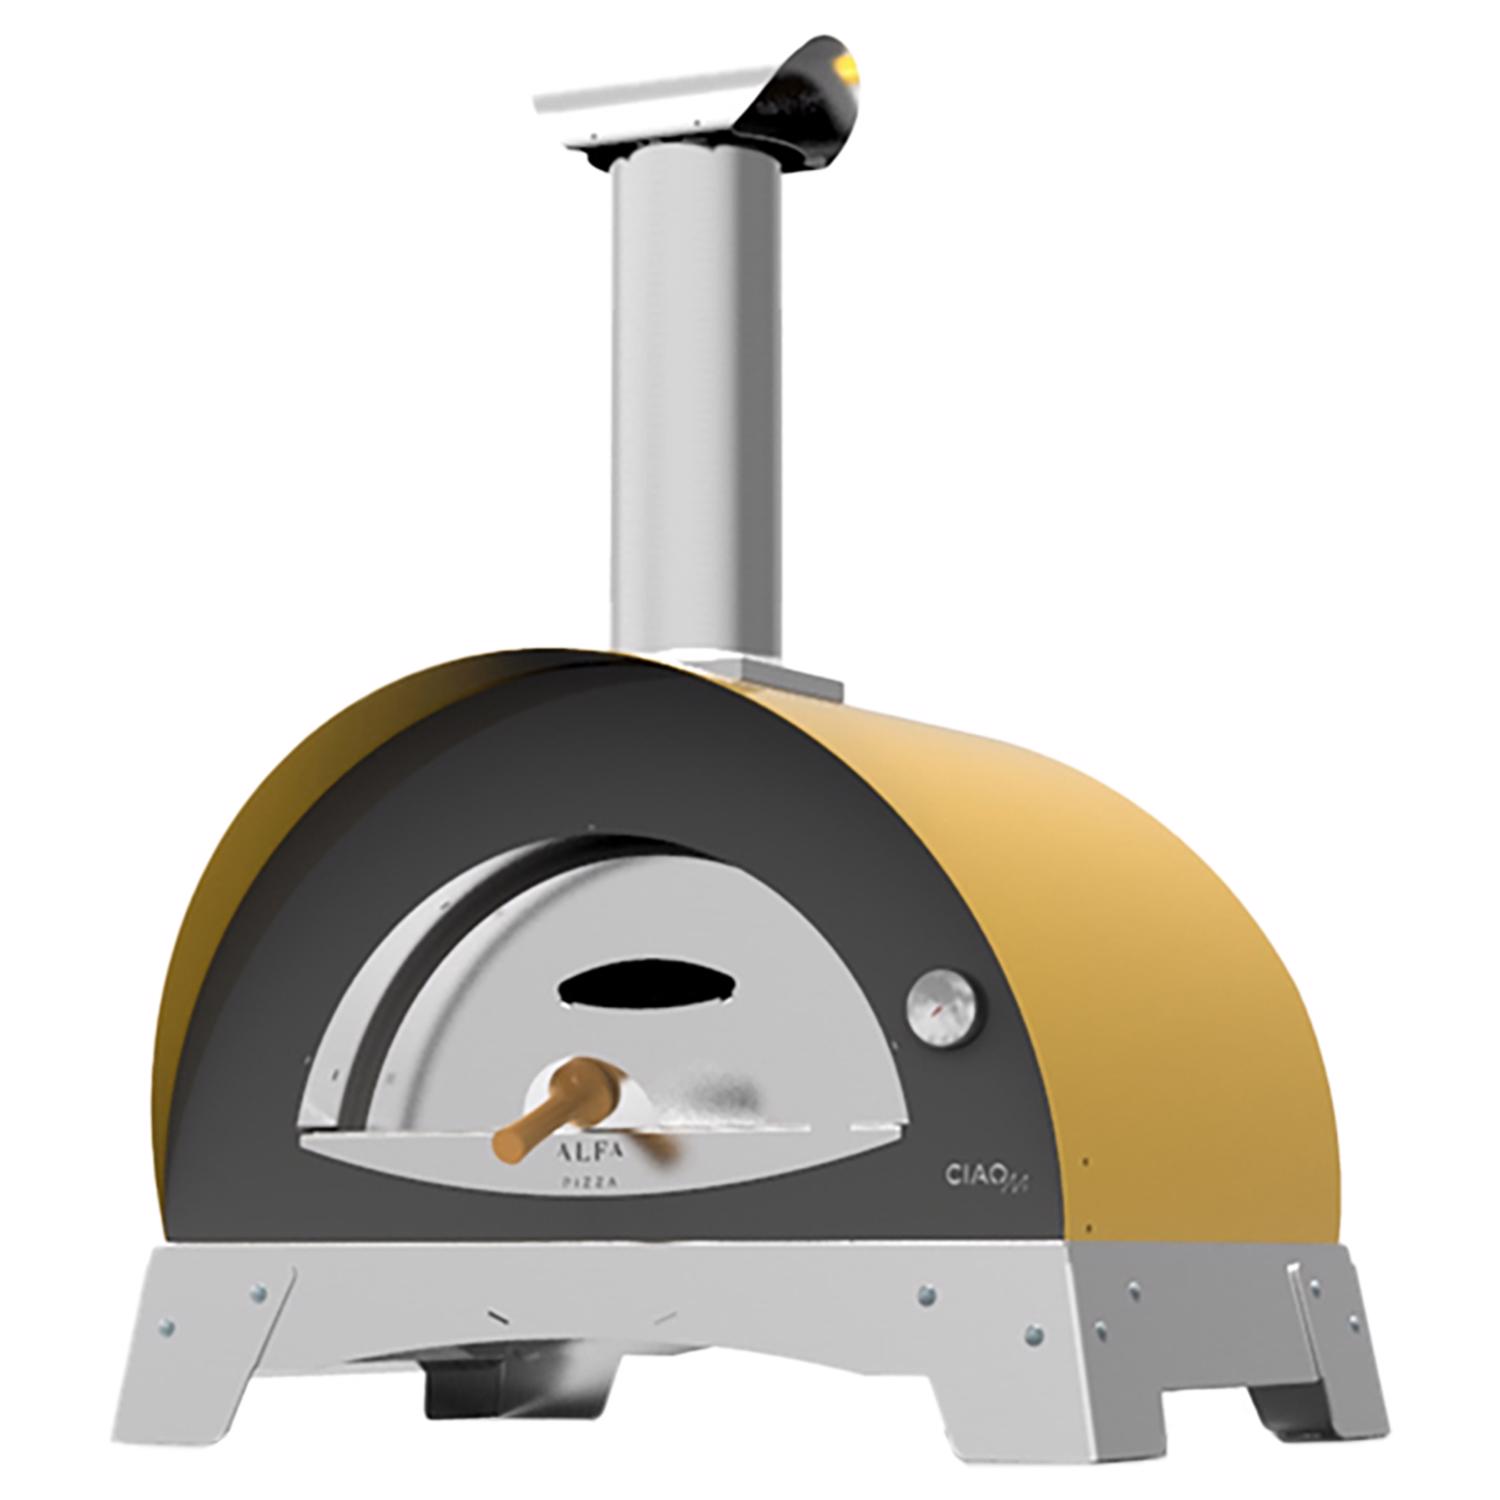 Photos - Restaurant Equipment Alfa 36 in. Wood Ciao Outdoor Pizza Oven Yellow FXCM-LGIA-T-V2 